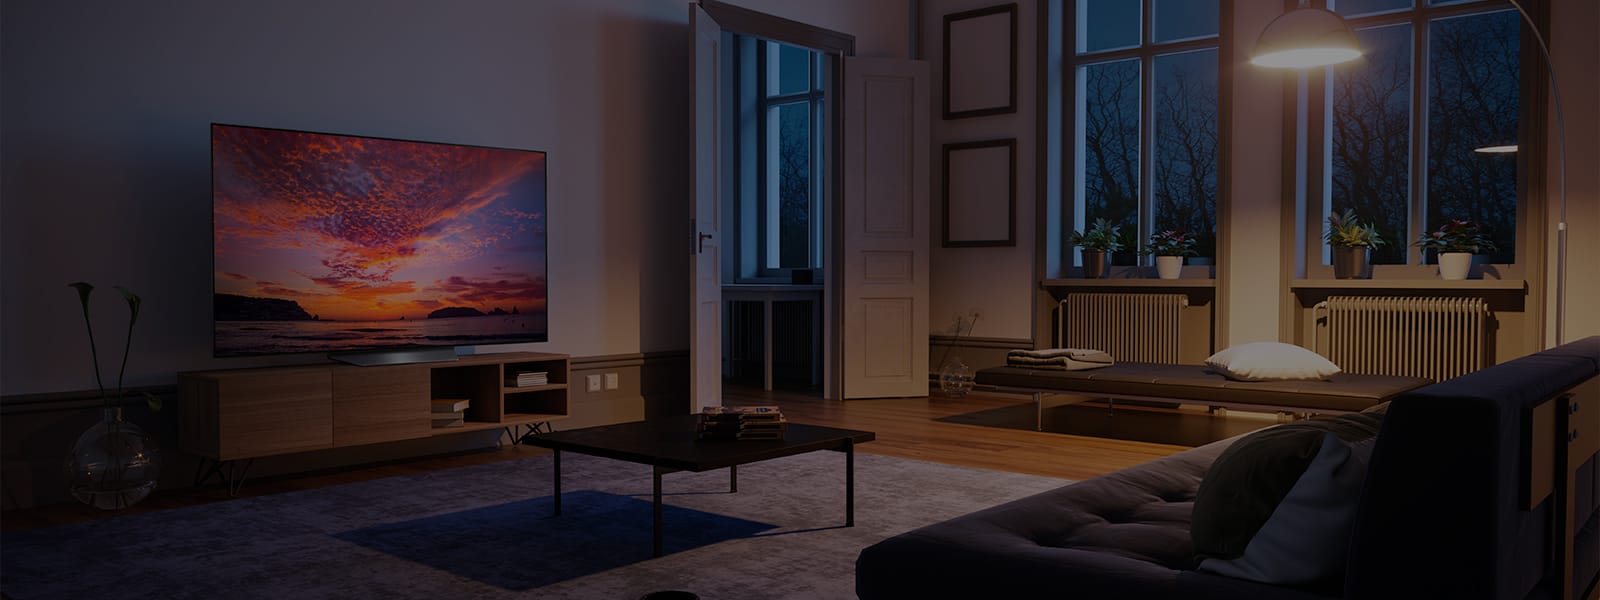 Living room with LG TV